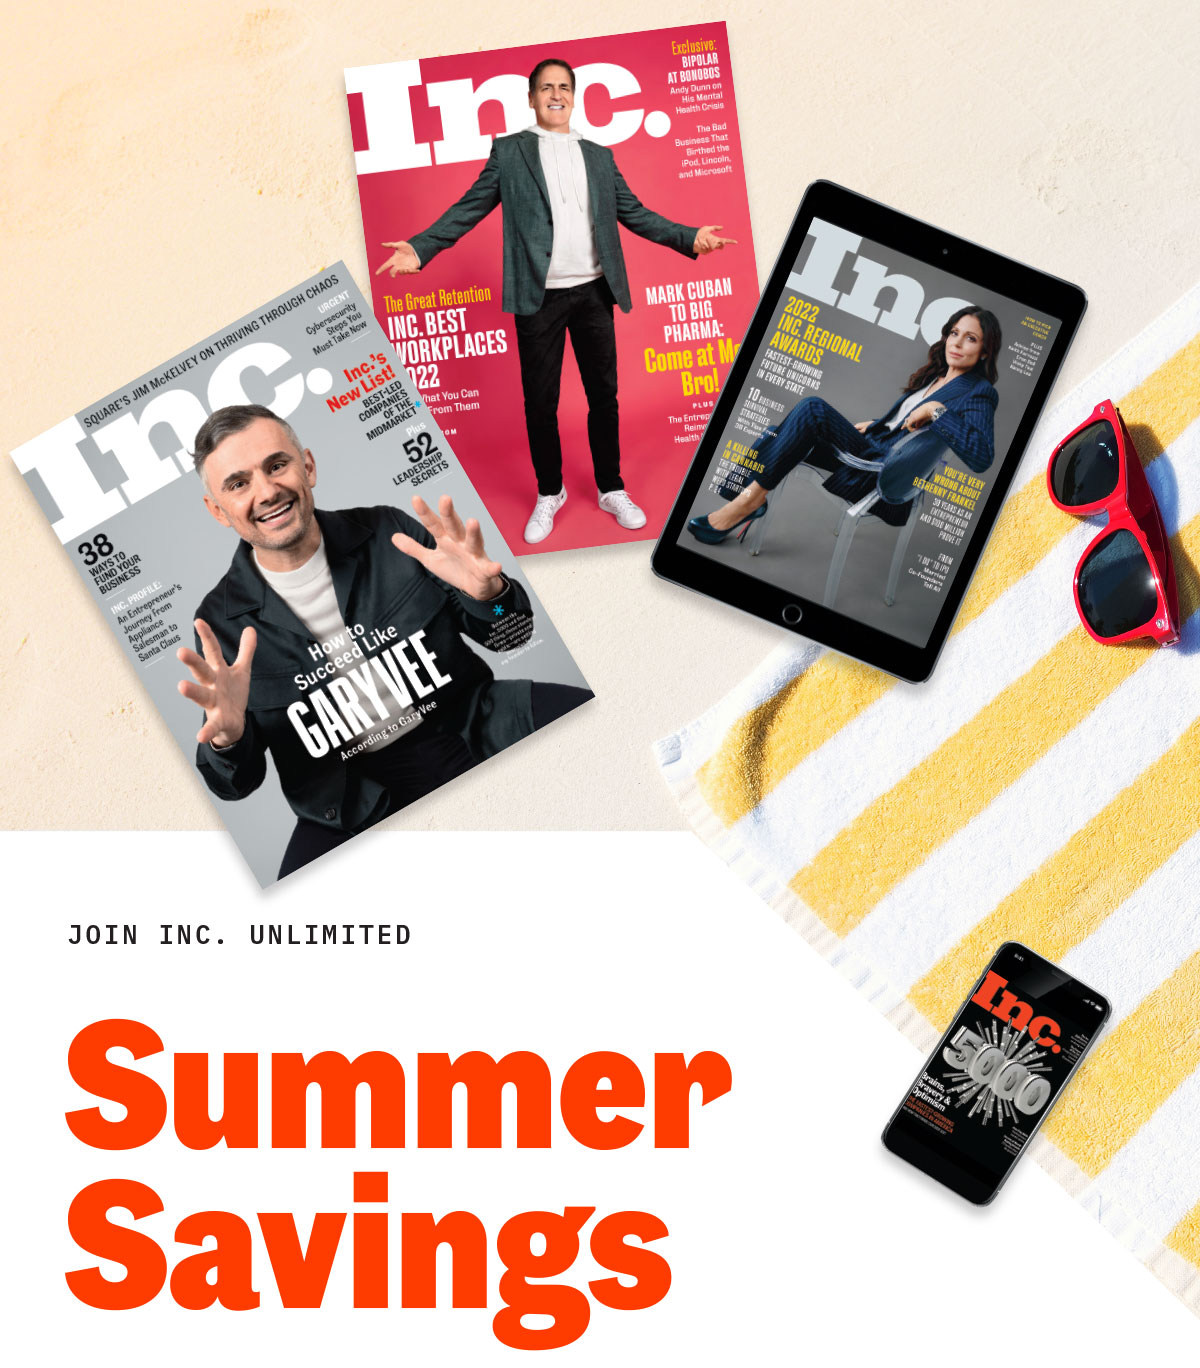 Summer Savings: Join Inc. Unlimited